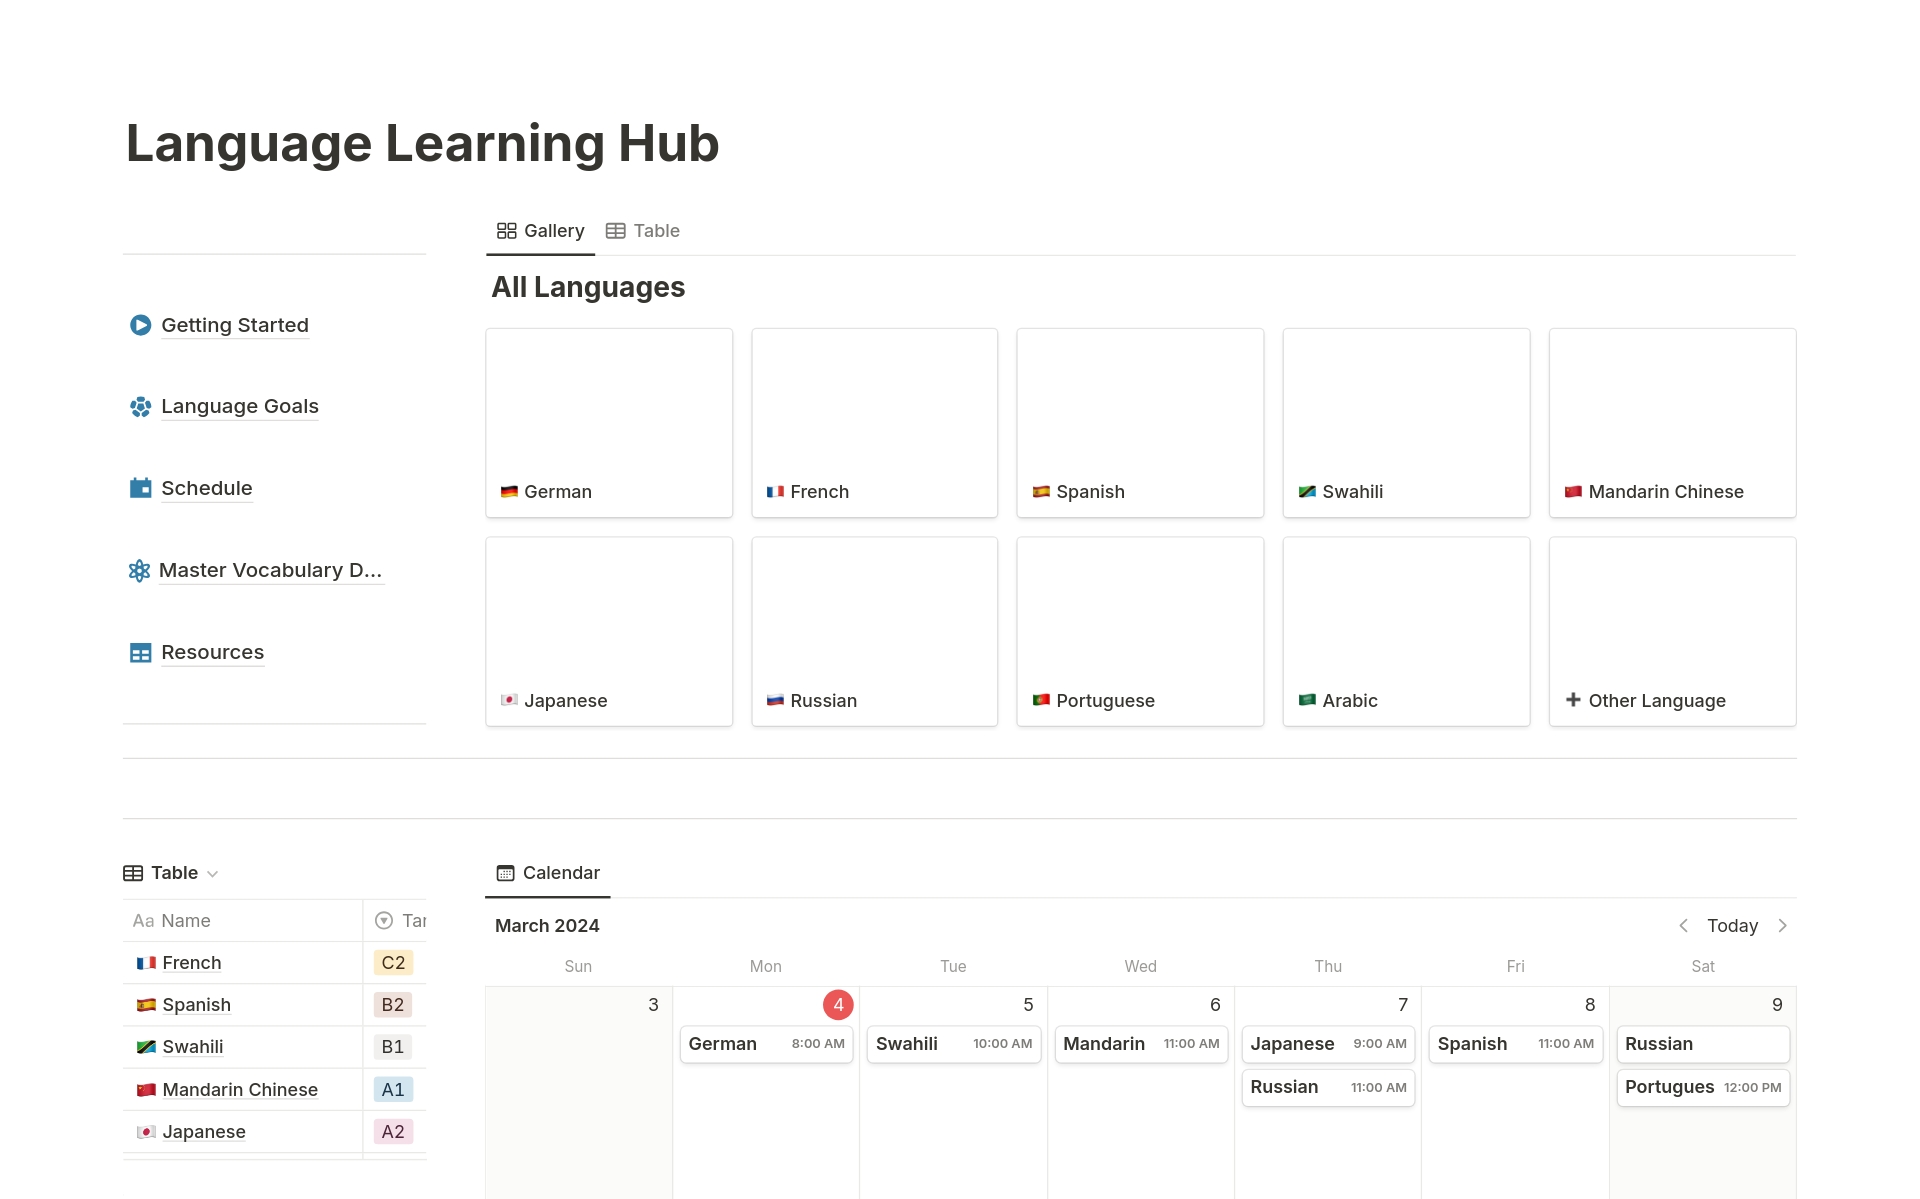 Language Learning Hub is a template that enables you to learn several languages at a time. It features a section to outline your language goals, a master vocabulary section, a languages section with detailed tools for studying each language, a calendar section to schedule & more.